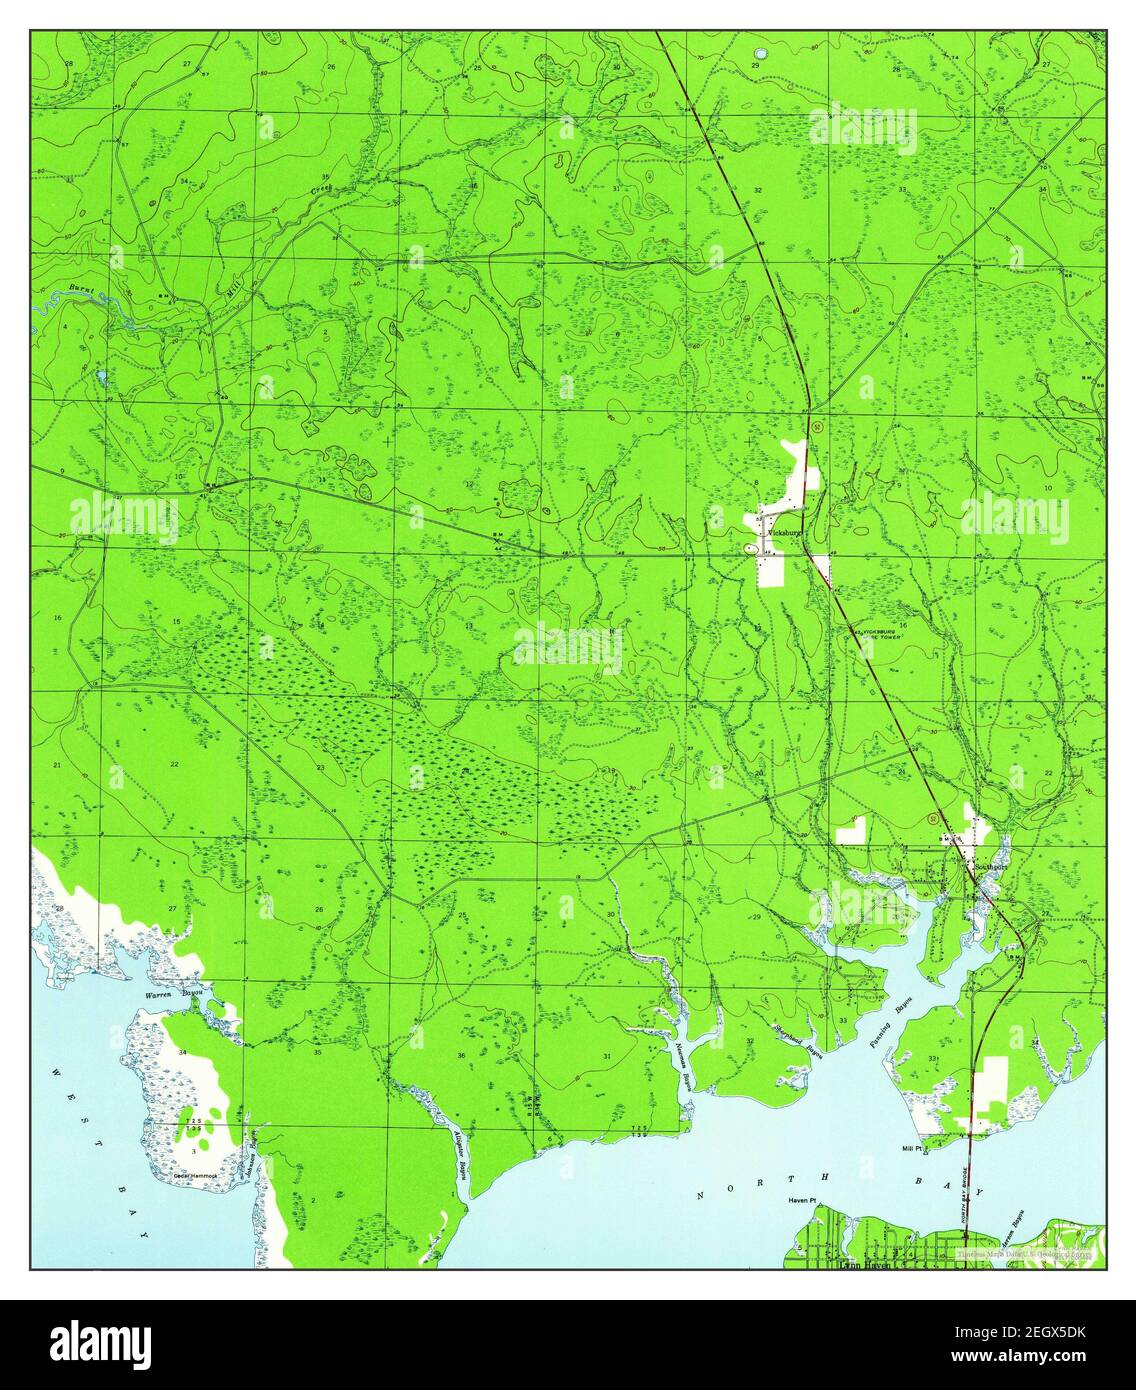 Southport, Florida, map 1944, 1:24000, United States of America by Timeless Maps, data U.S. Geological Survey Stock Photo